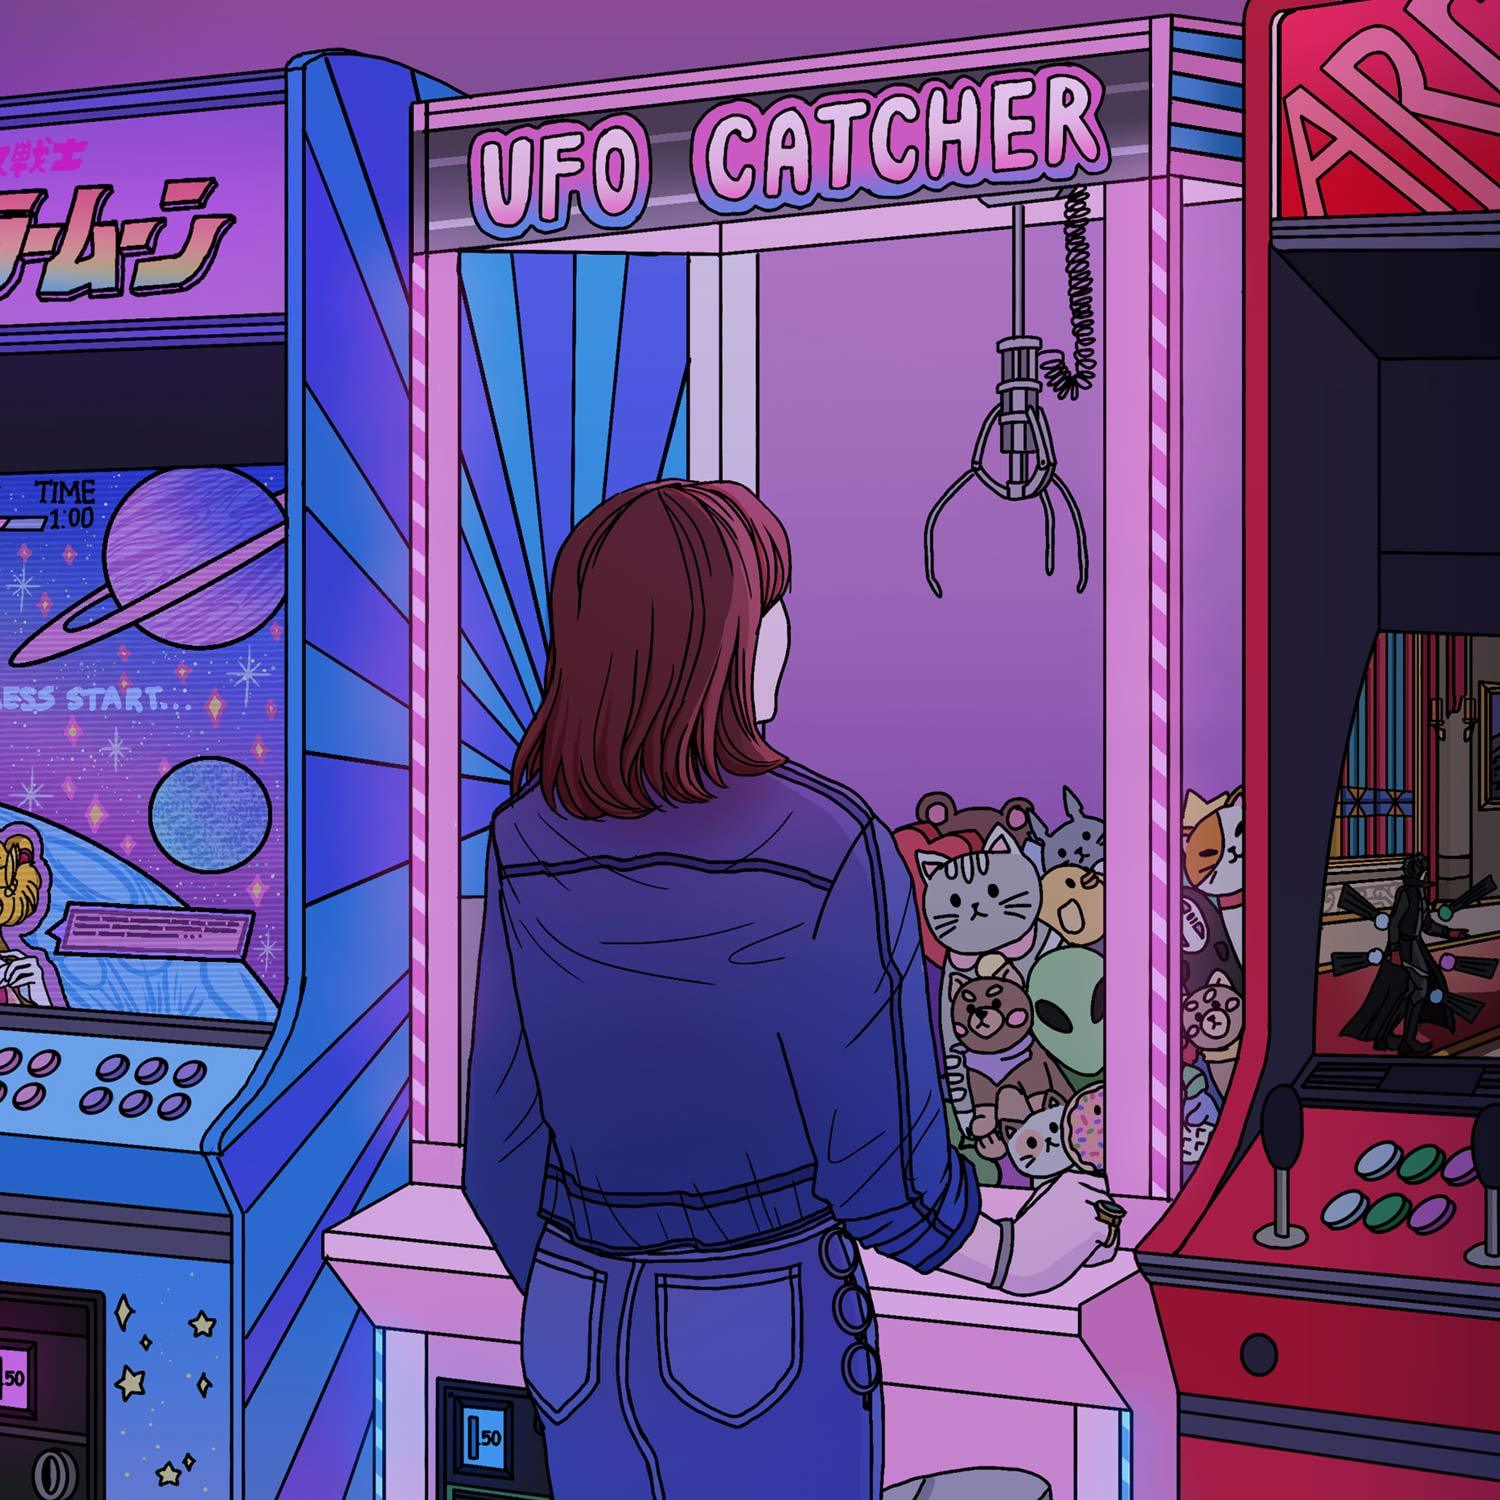 A woman standing in front of an arcade game - Arcade